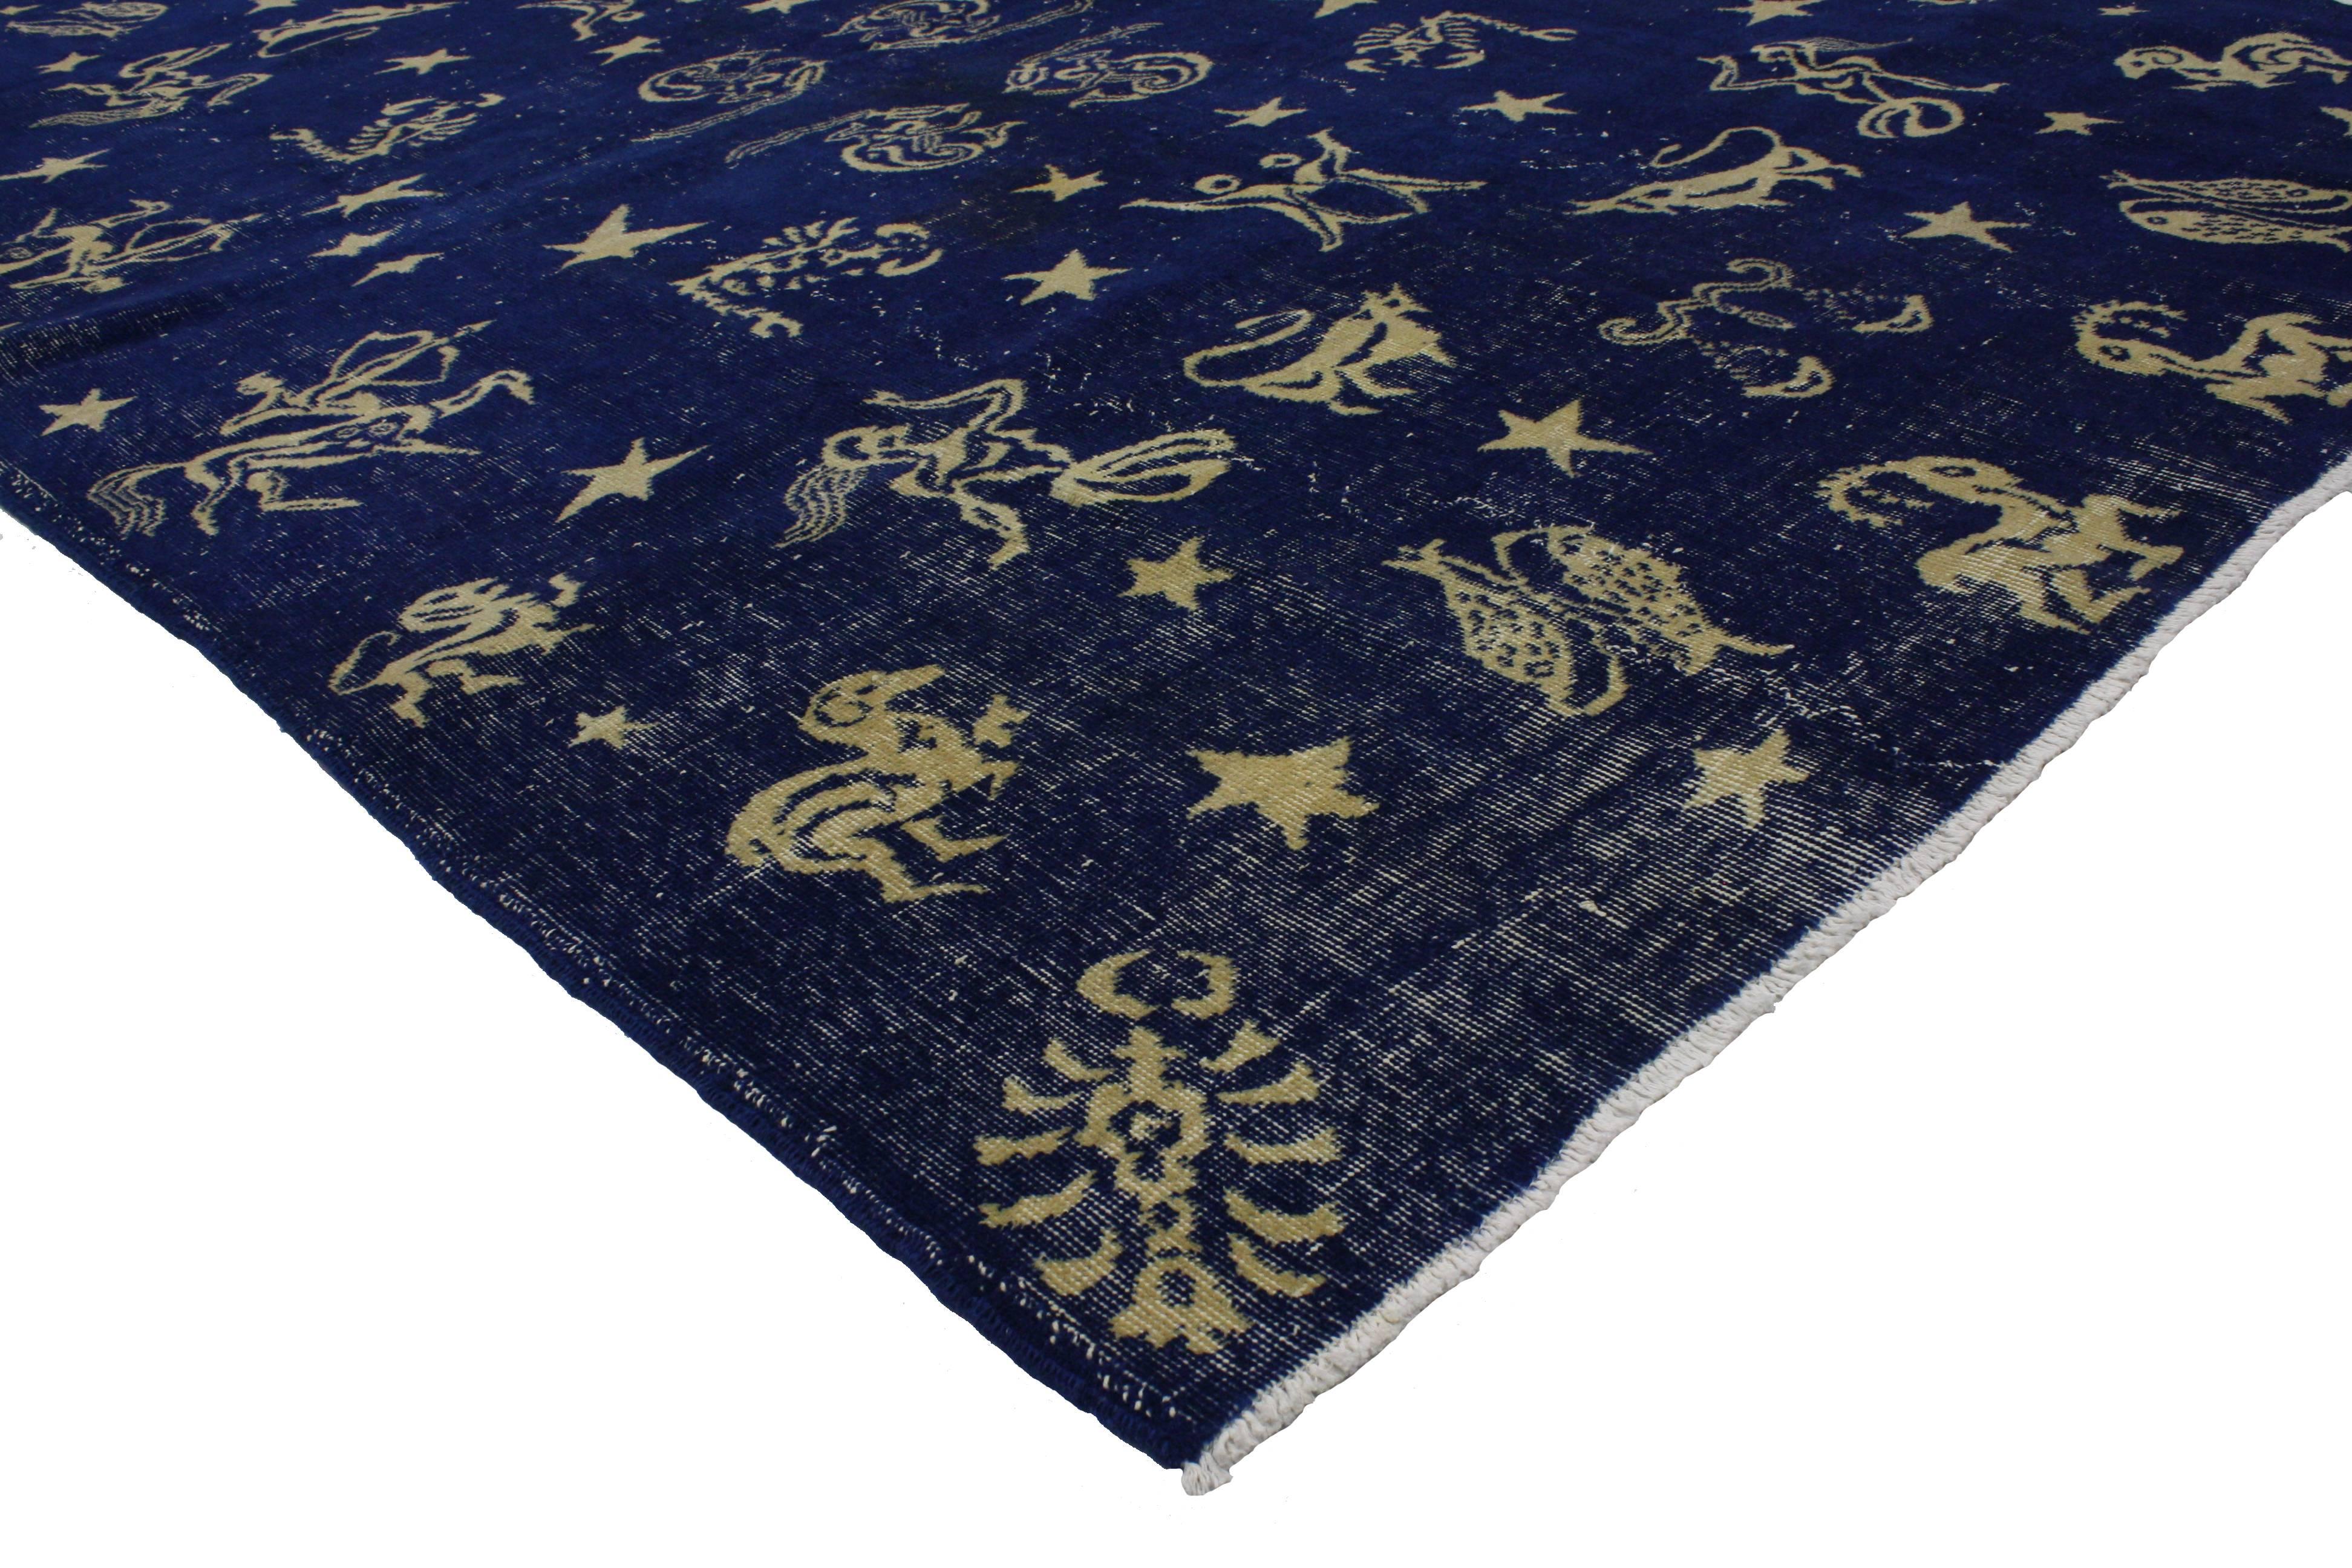 Full of whimsy and astrological symbolism, this distressed vintage Turkish Sivas zodiac rug features a modern Industrial style. Saturated in an extraordinary palette of midnight navy blue with beige motifs, this zodiac rug showcases exquisite